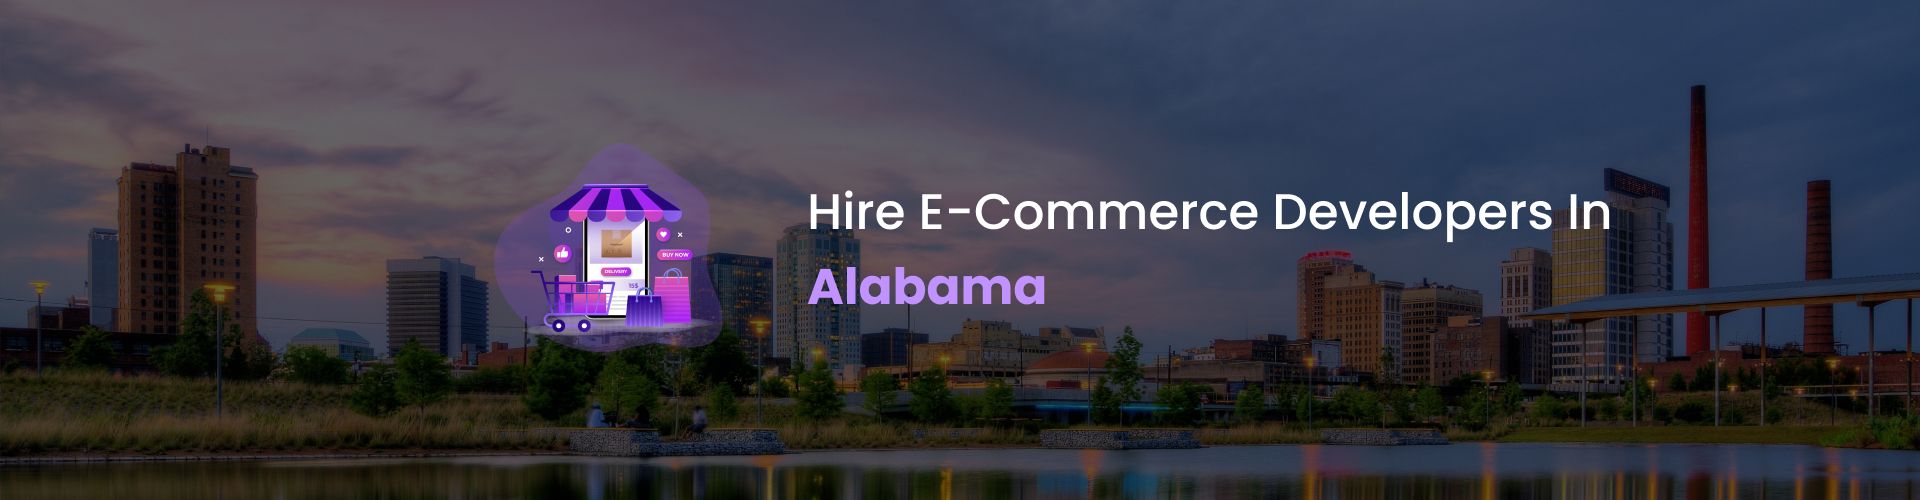 hire ecommerce developers in alabama